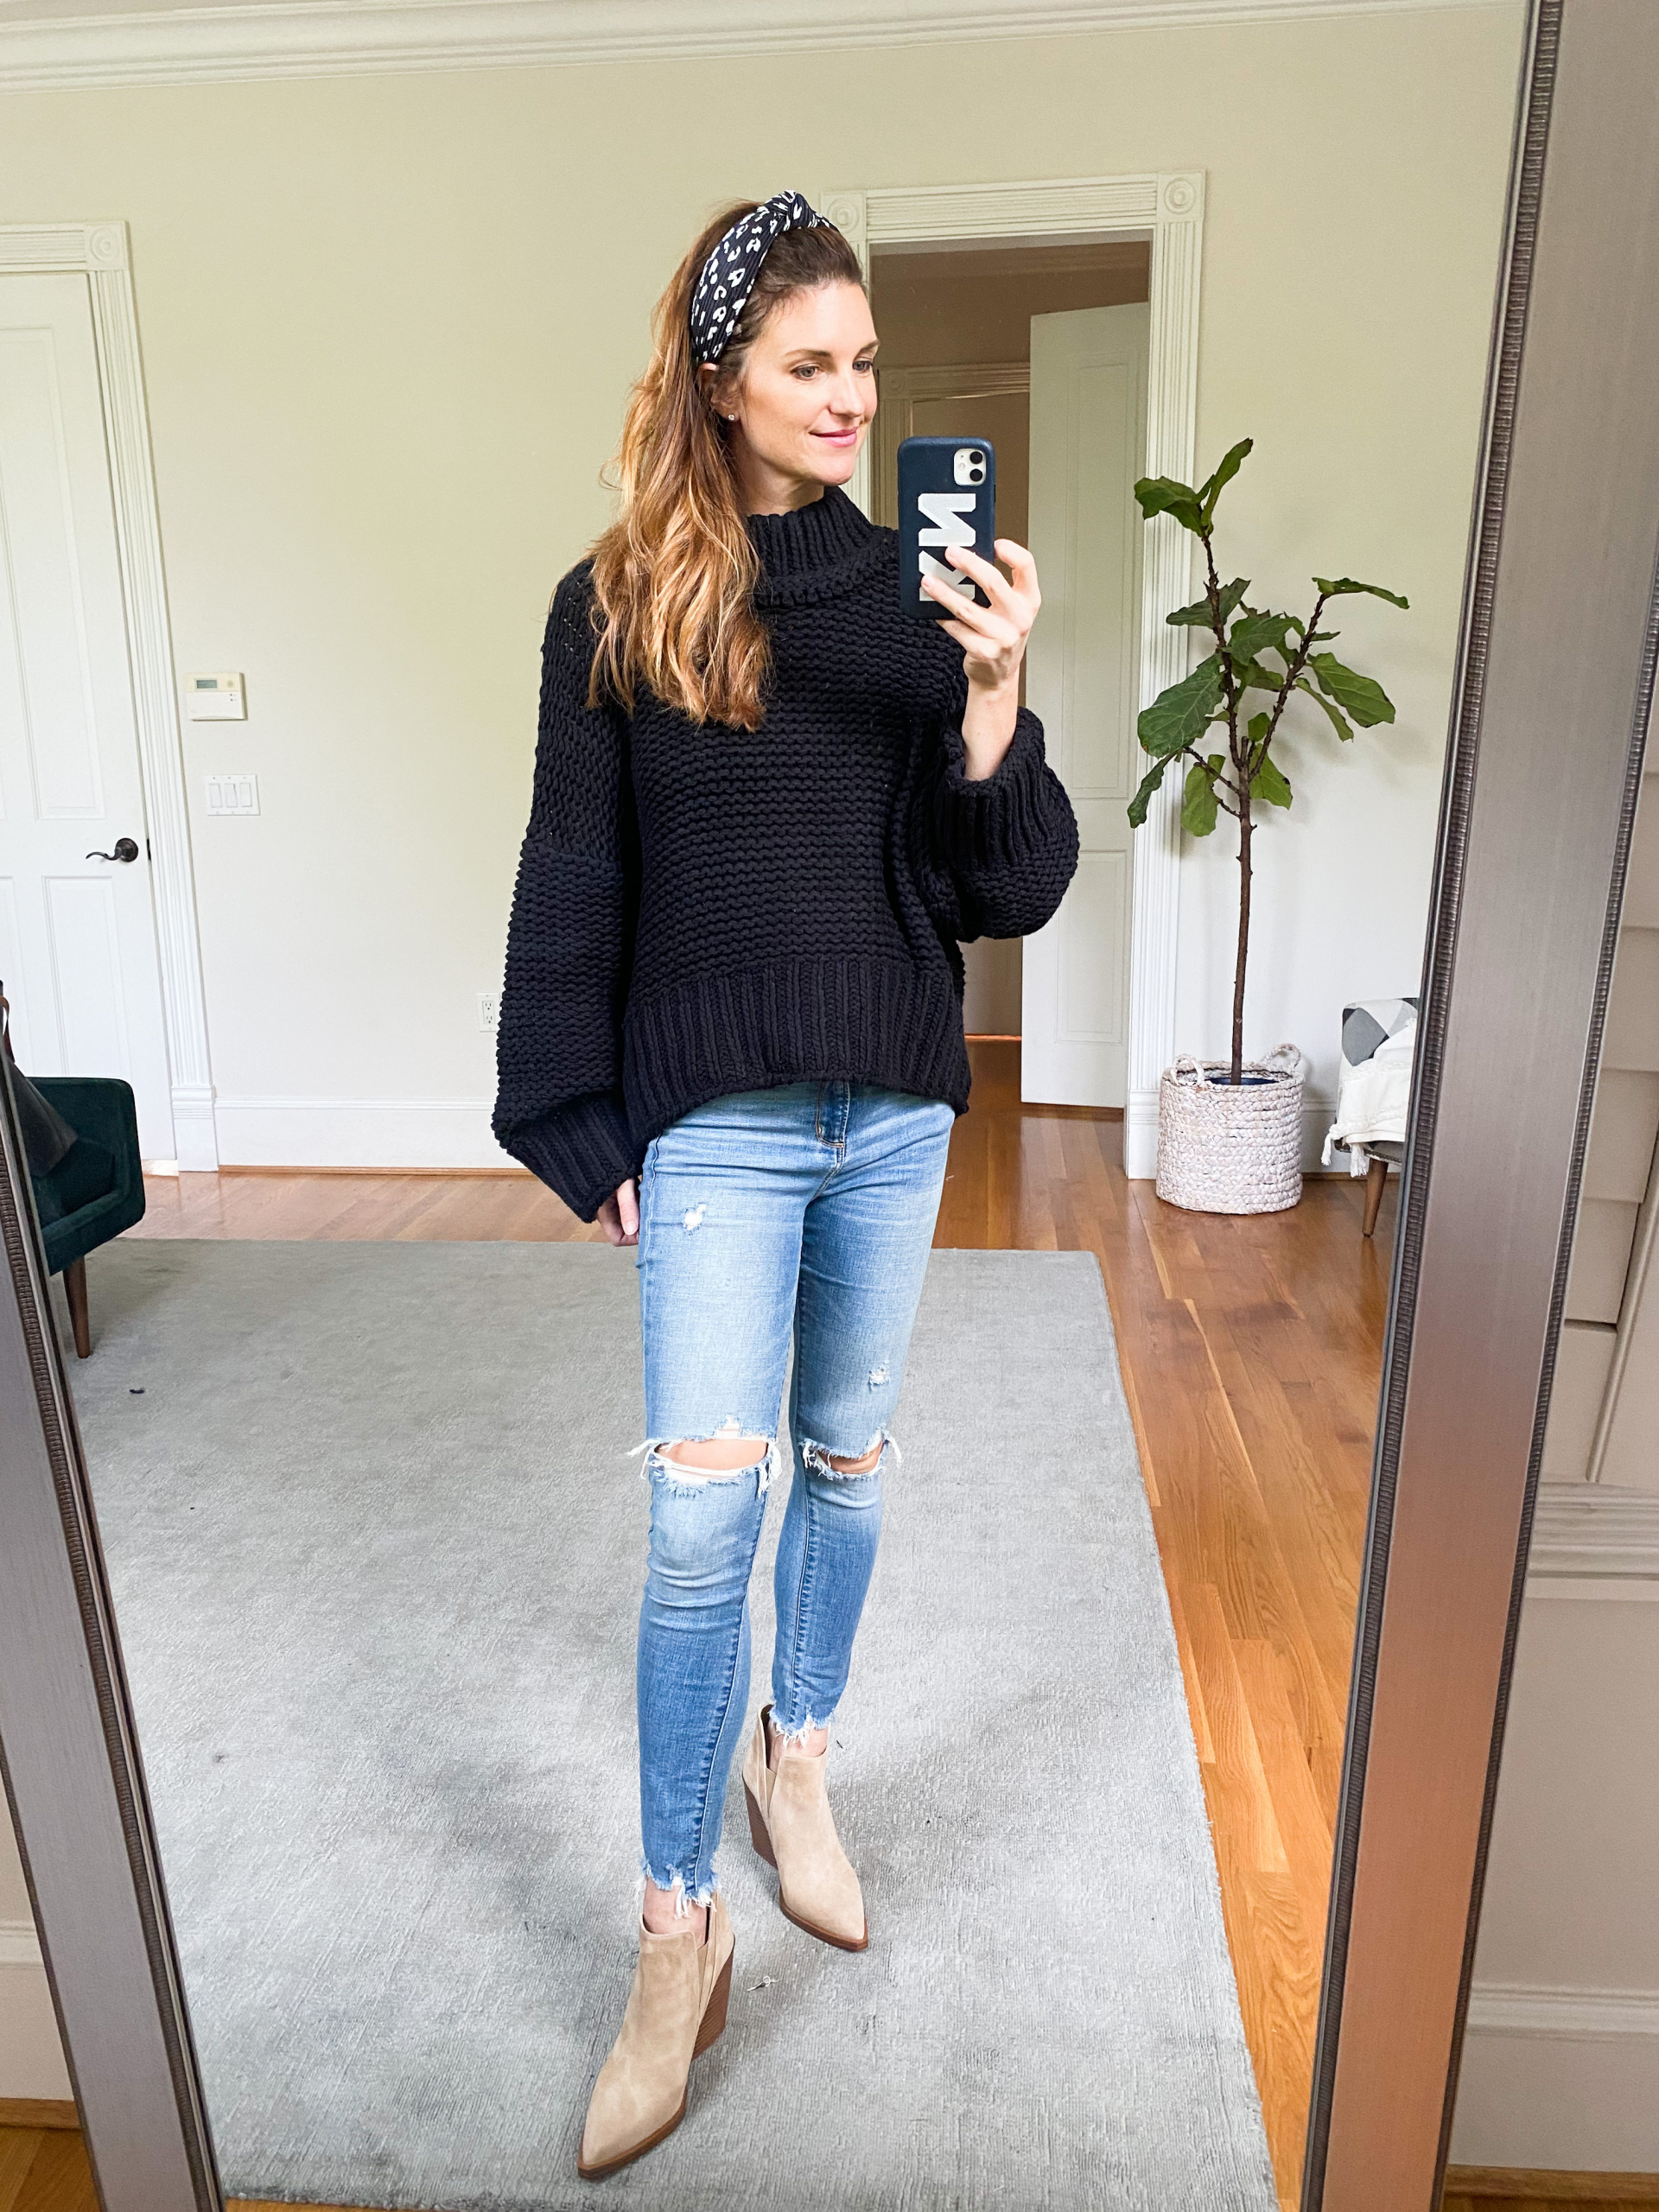 Black sweater outfit ideas, black sweater looks for fall and winter, weekend outfits, finding beauty mom outfit ideas